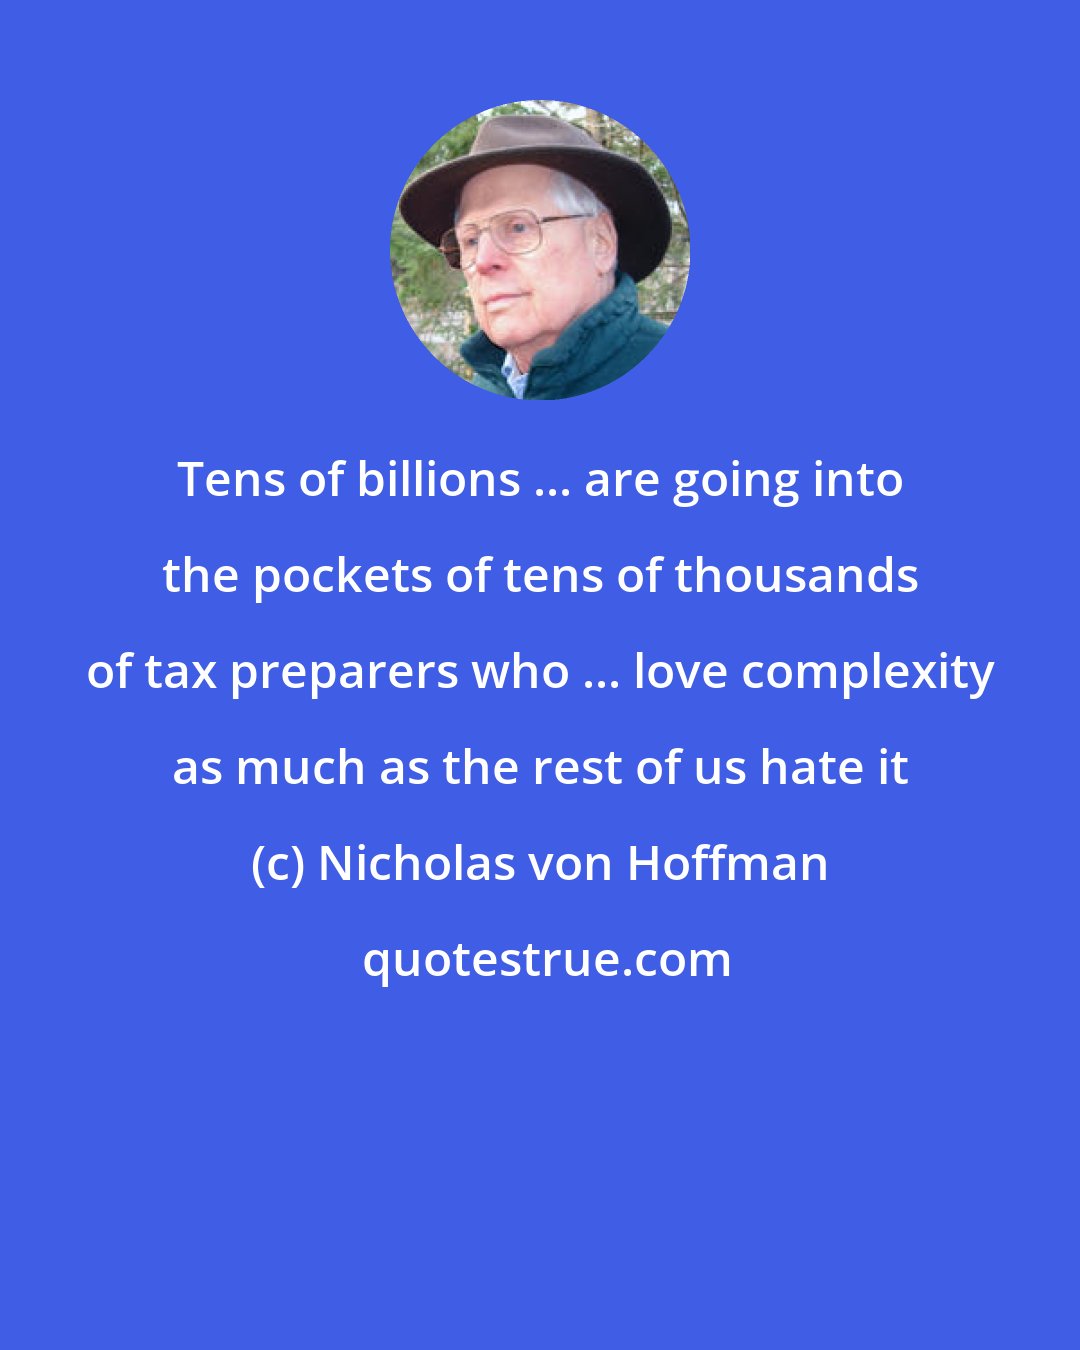 Nicholas von Hoffman: Tens of billions ... are going into the pockets of tens of thousands of tax preparers who ... love complexity as much as the rest of us hate it